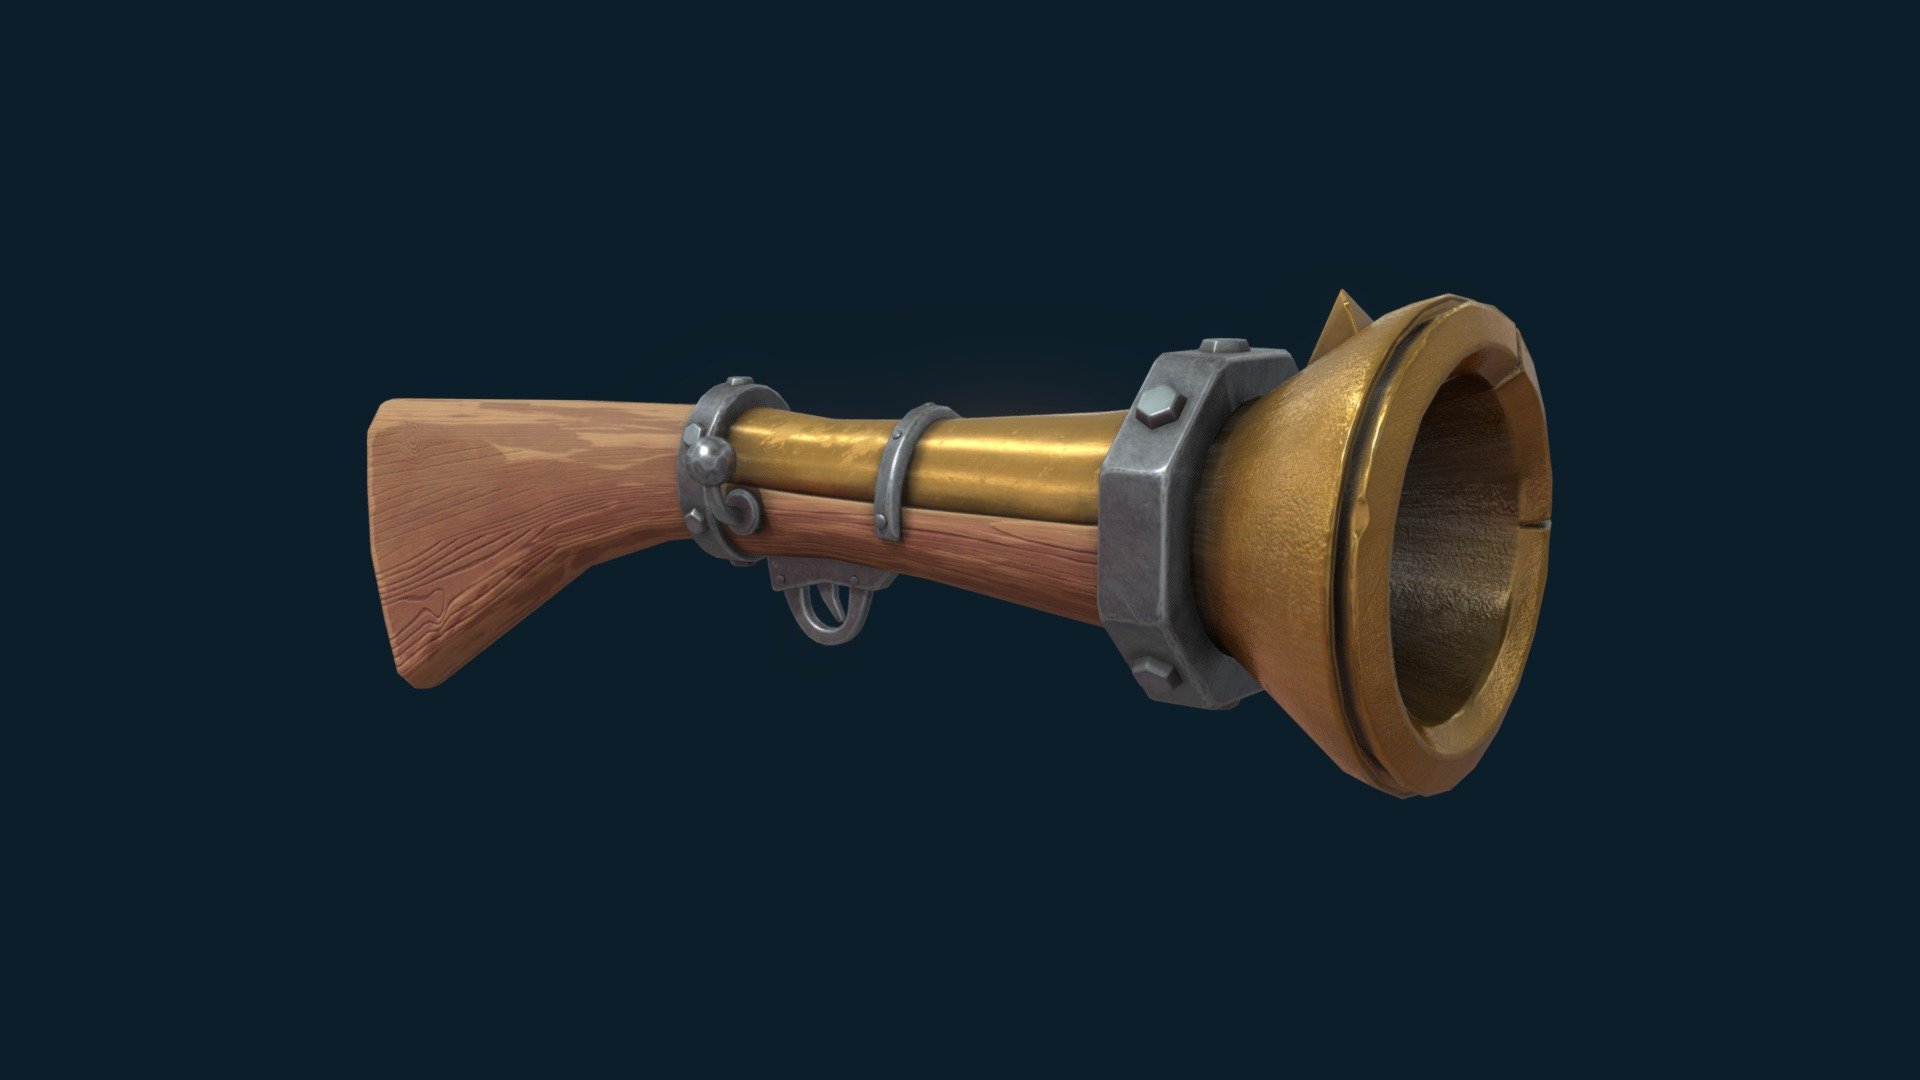 Modelled in Blender

Textured in Substance Painter

Texture Size: 4096x4096

Textures format: PNG

Textures for PBRmetalRough

Optimized for games

Triangles: 3.6k

Vertices: 2k
 - Stylized Dwarf's Gun - Buy Royalty Free 3D model by SantyFrow 3d model